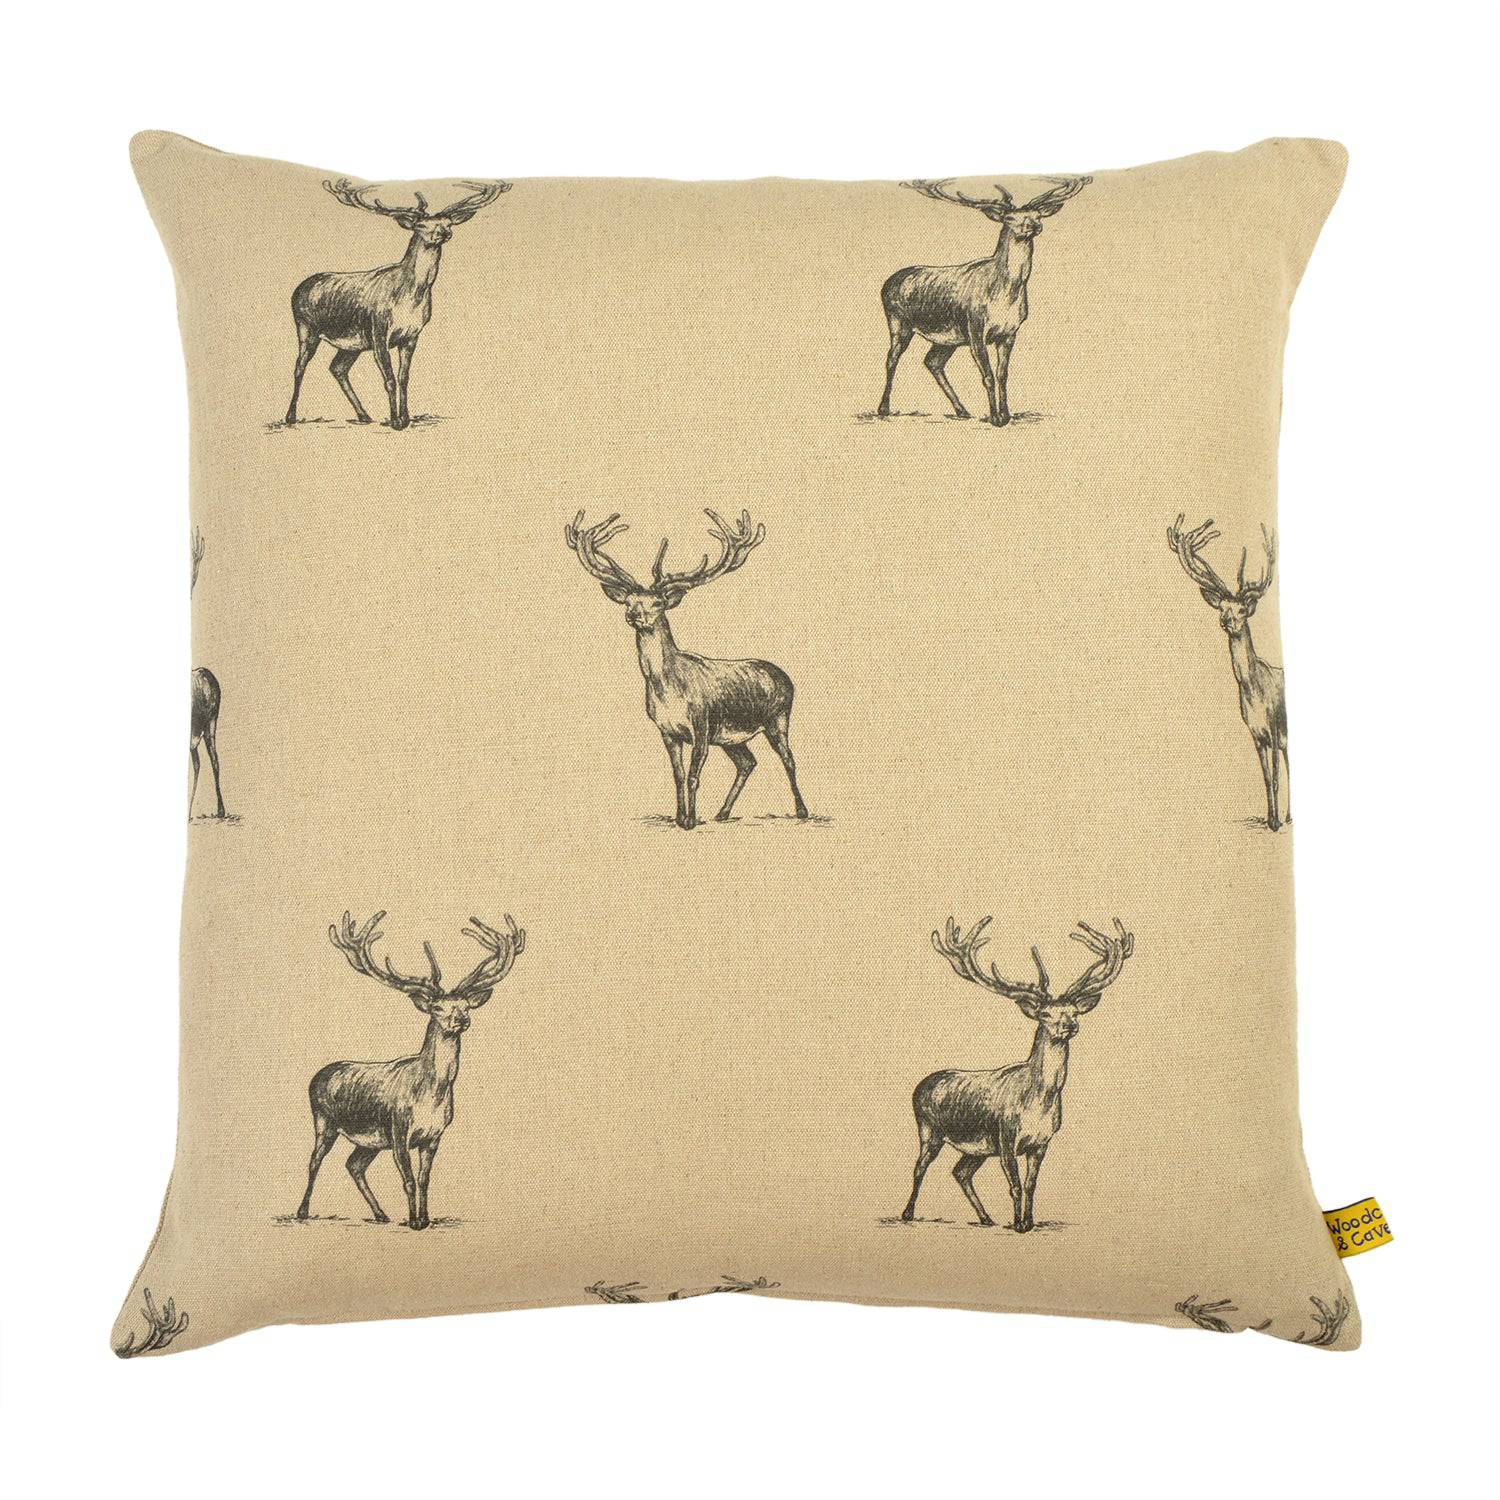 Stag Linen Cushion by Woodcock & Cavendish for sale - Woodcock and Cavendish